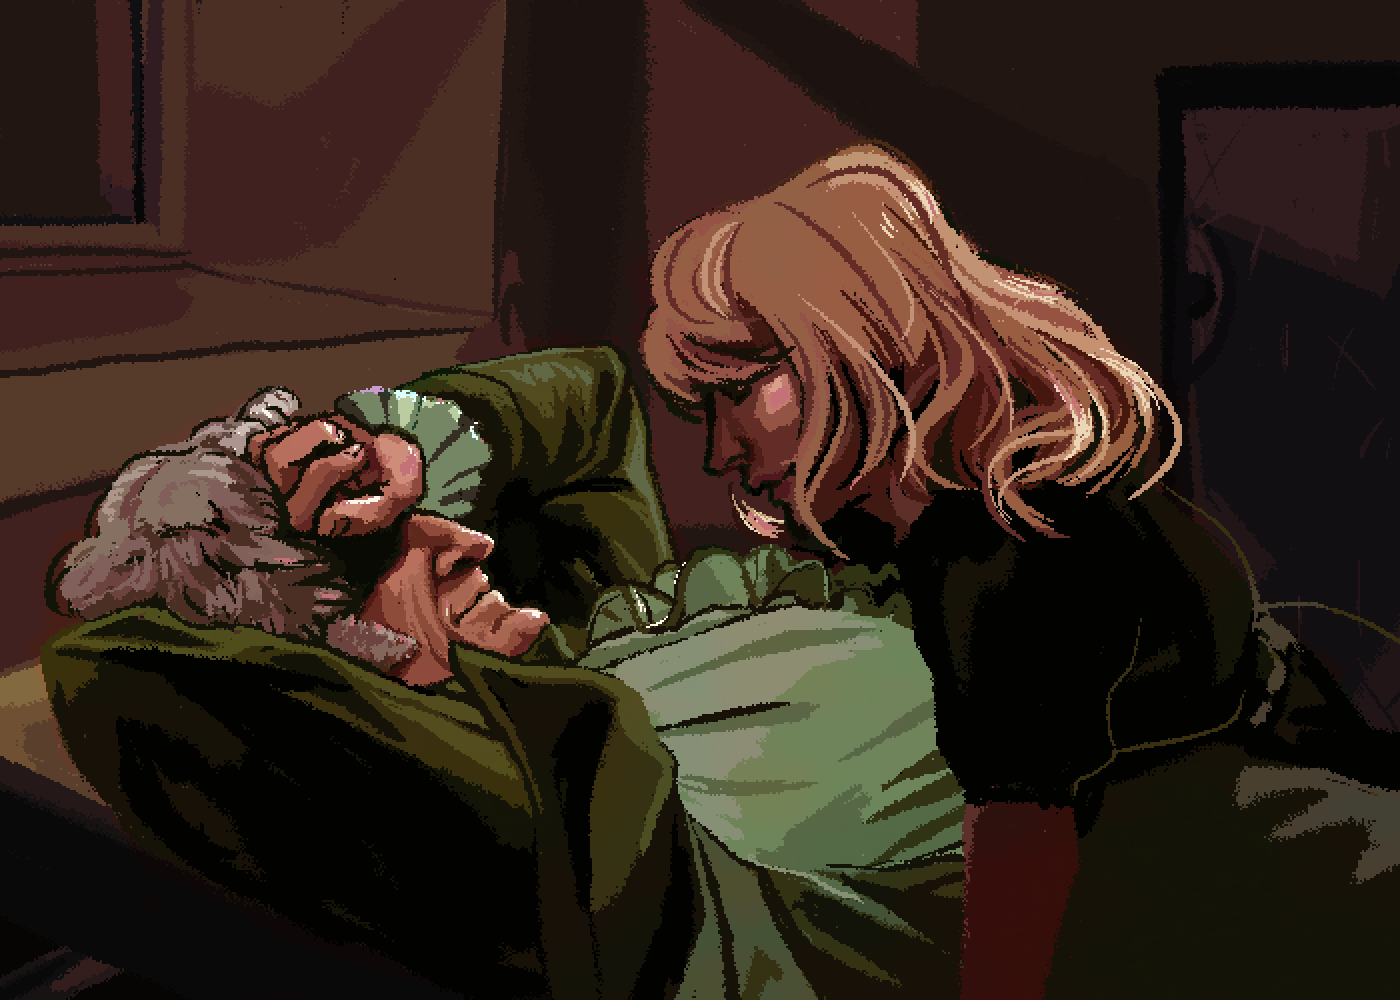 Pixel art drawing of the third doctor and Jo grant. The doctor is lying back on a table while Jo leans over him very closely and they smile at each other.